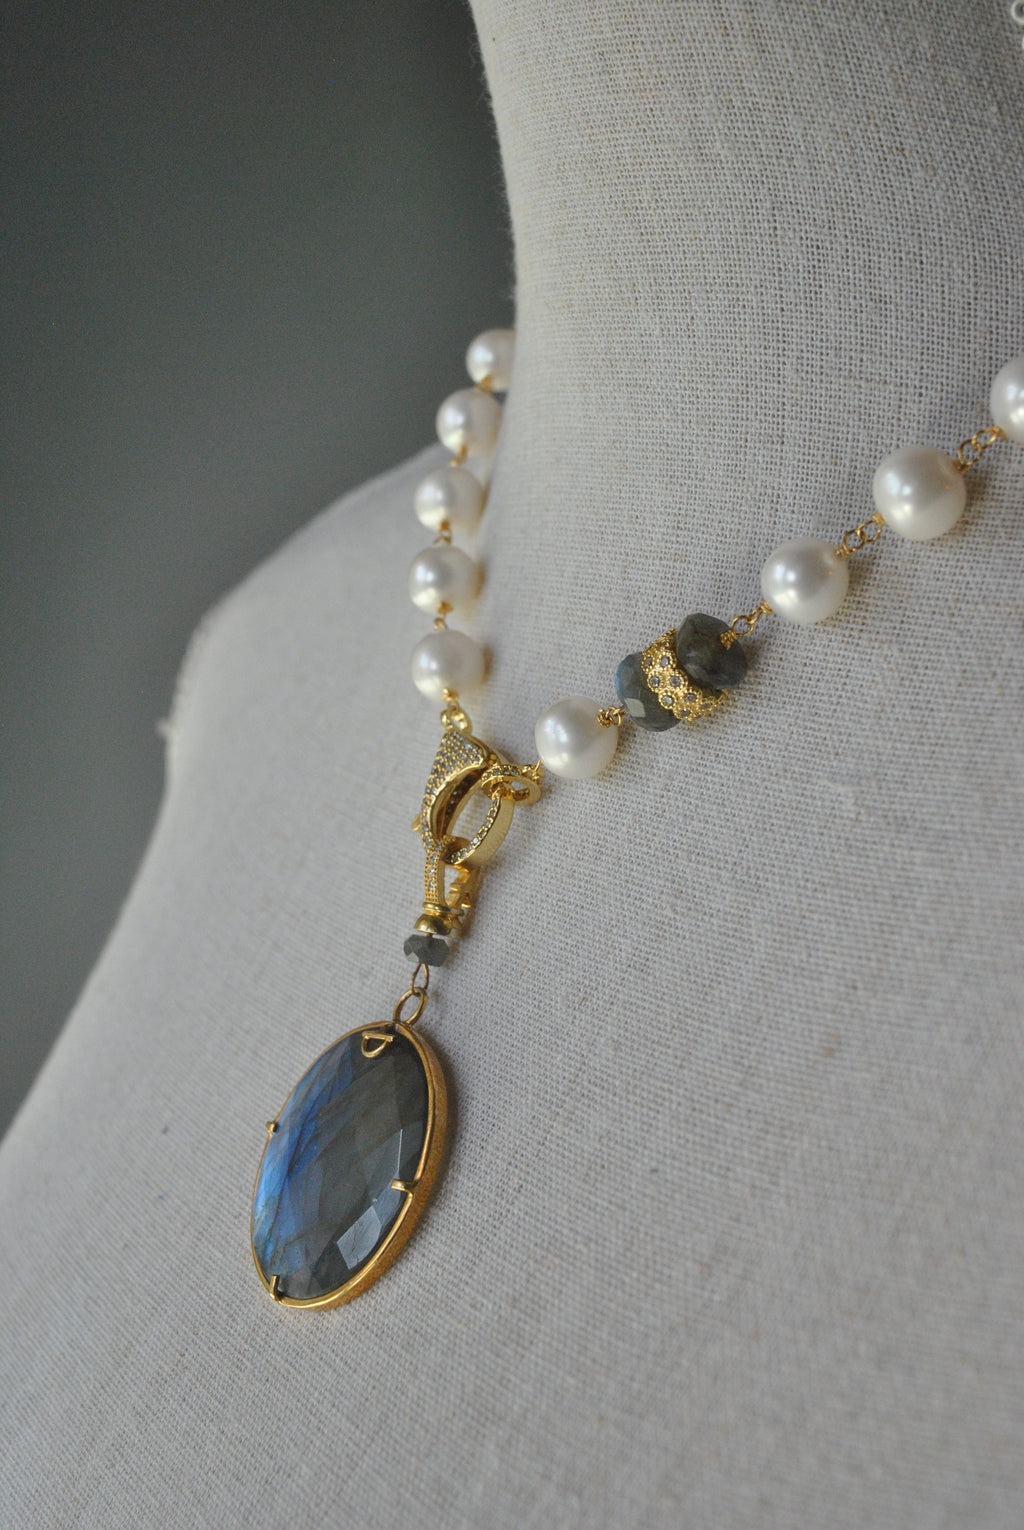 WHITE FRESHWATER PEARL AND LABRADORITE PENDANT NECKLACE